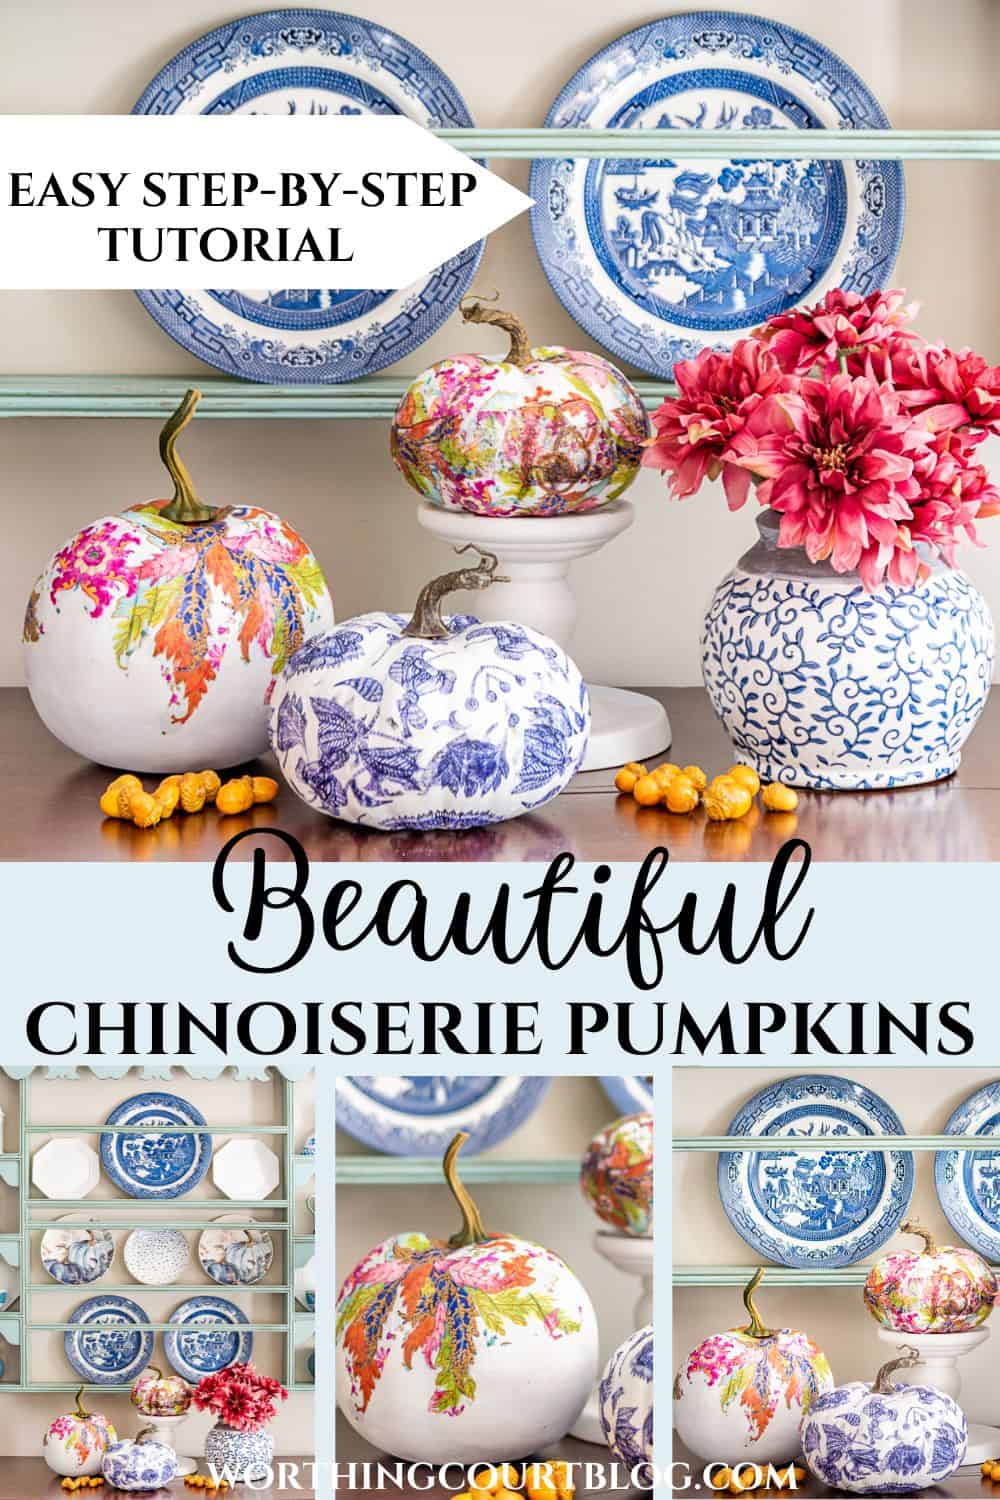 Pinterest graphic for making chinoiserie pumpkins